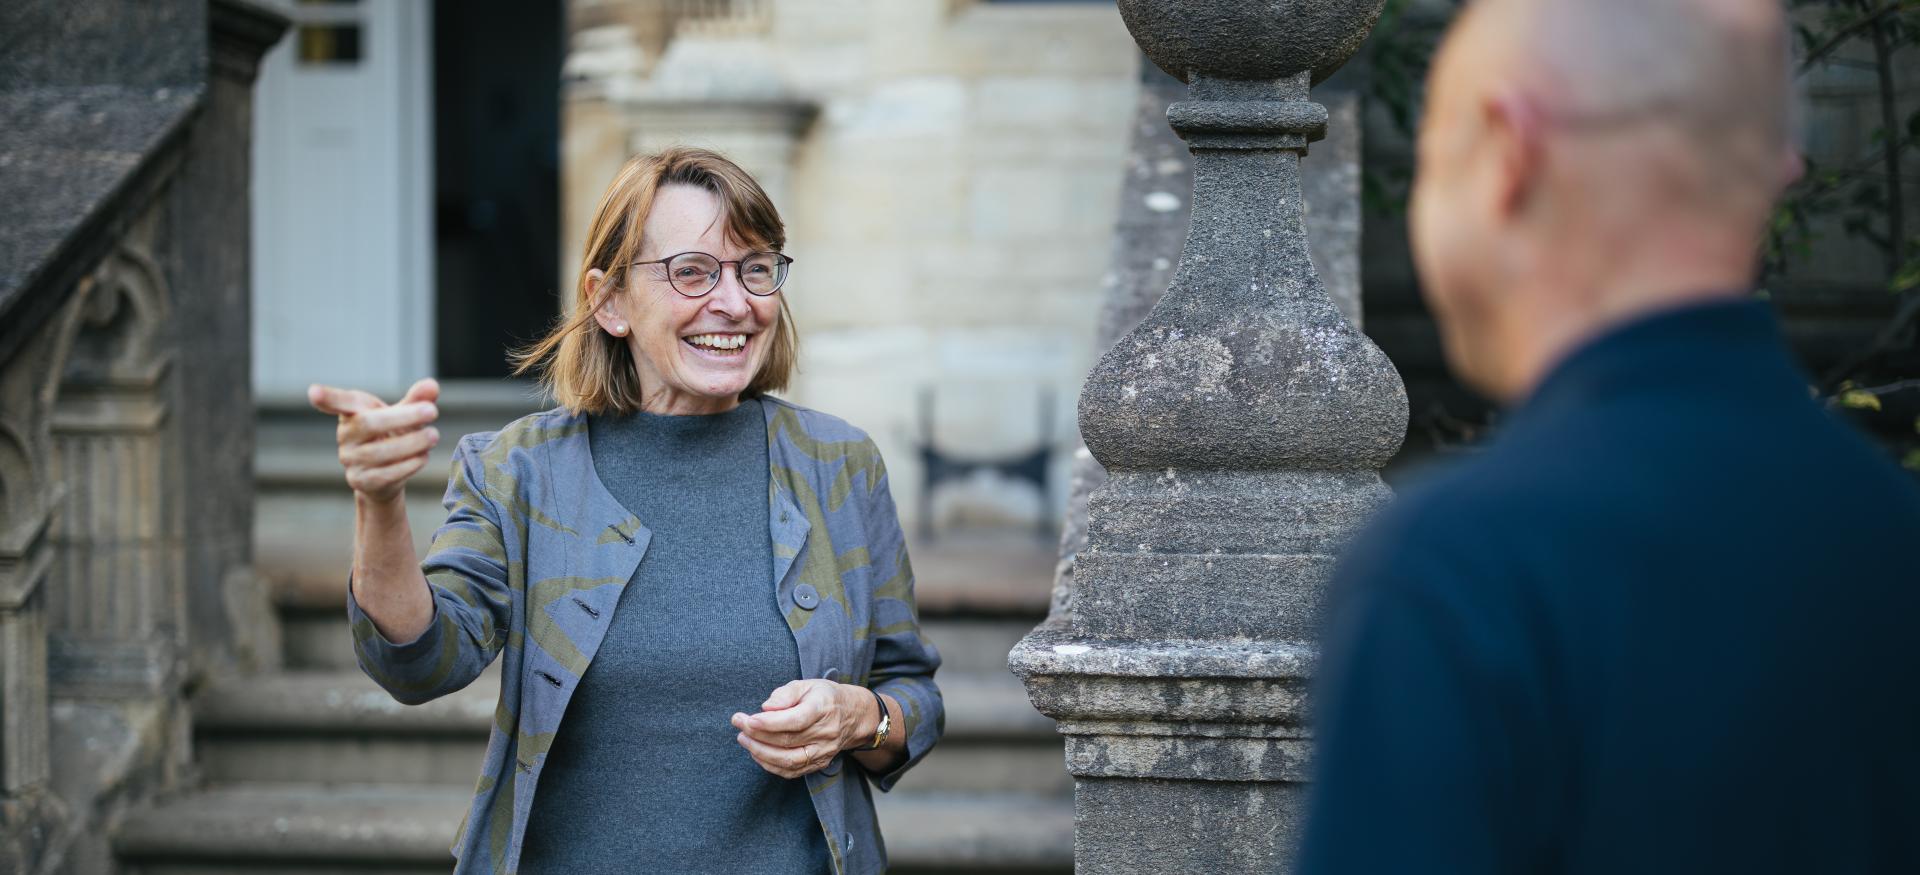 Trinity college president Hilary Boulding stands outside gesturing while talking to one of the college porters.